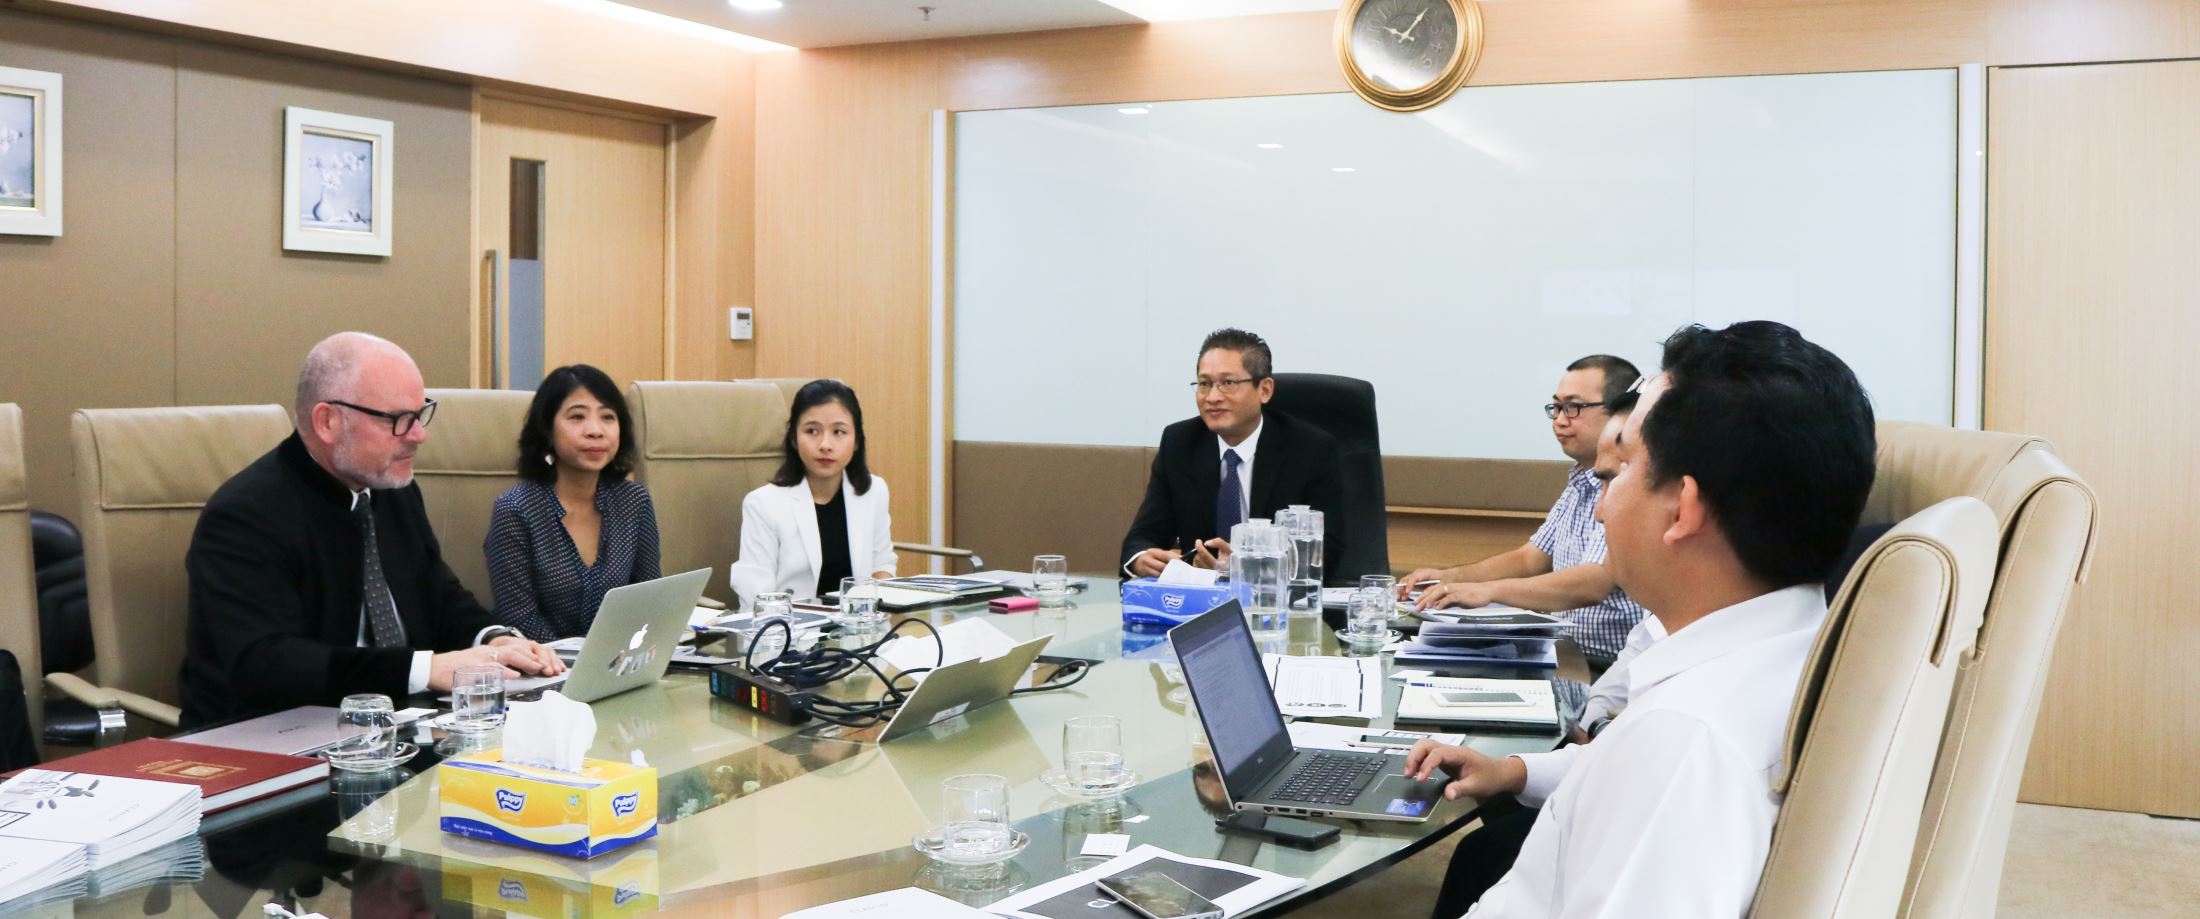 Mr. Vu Minh Tri - NHG Deputy CEO appreciated the Claned model and affirmed Nguyen Hoang Group's orientation in promoting Artificial Intelligence to optimize teaching & learning experience and effect,  as well as to improve the effectiveness of the quality management in whole education system